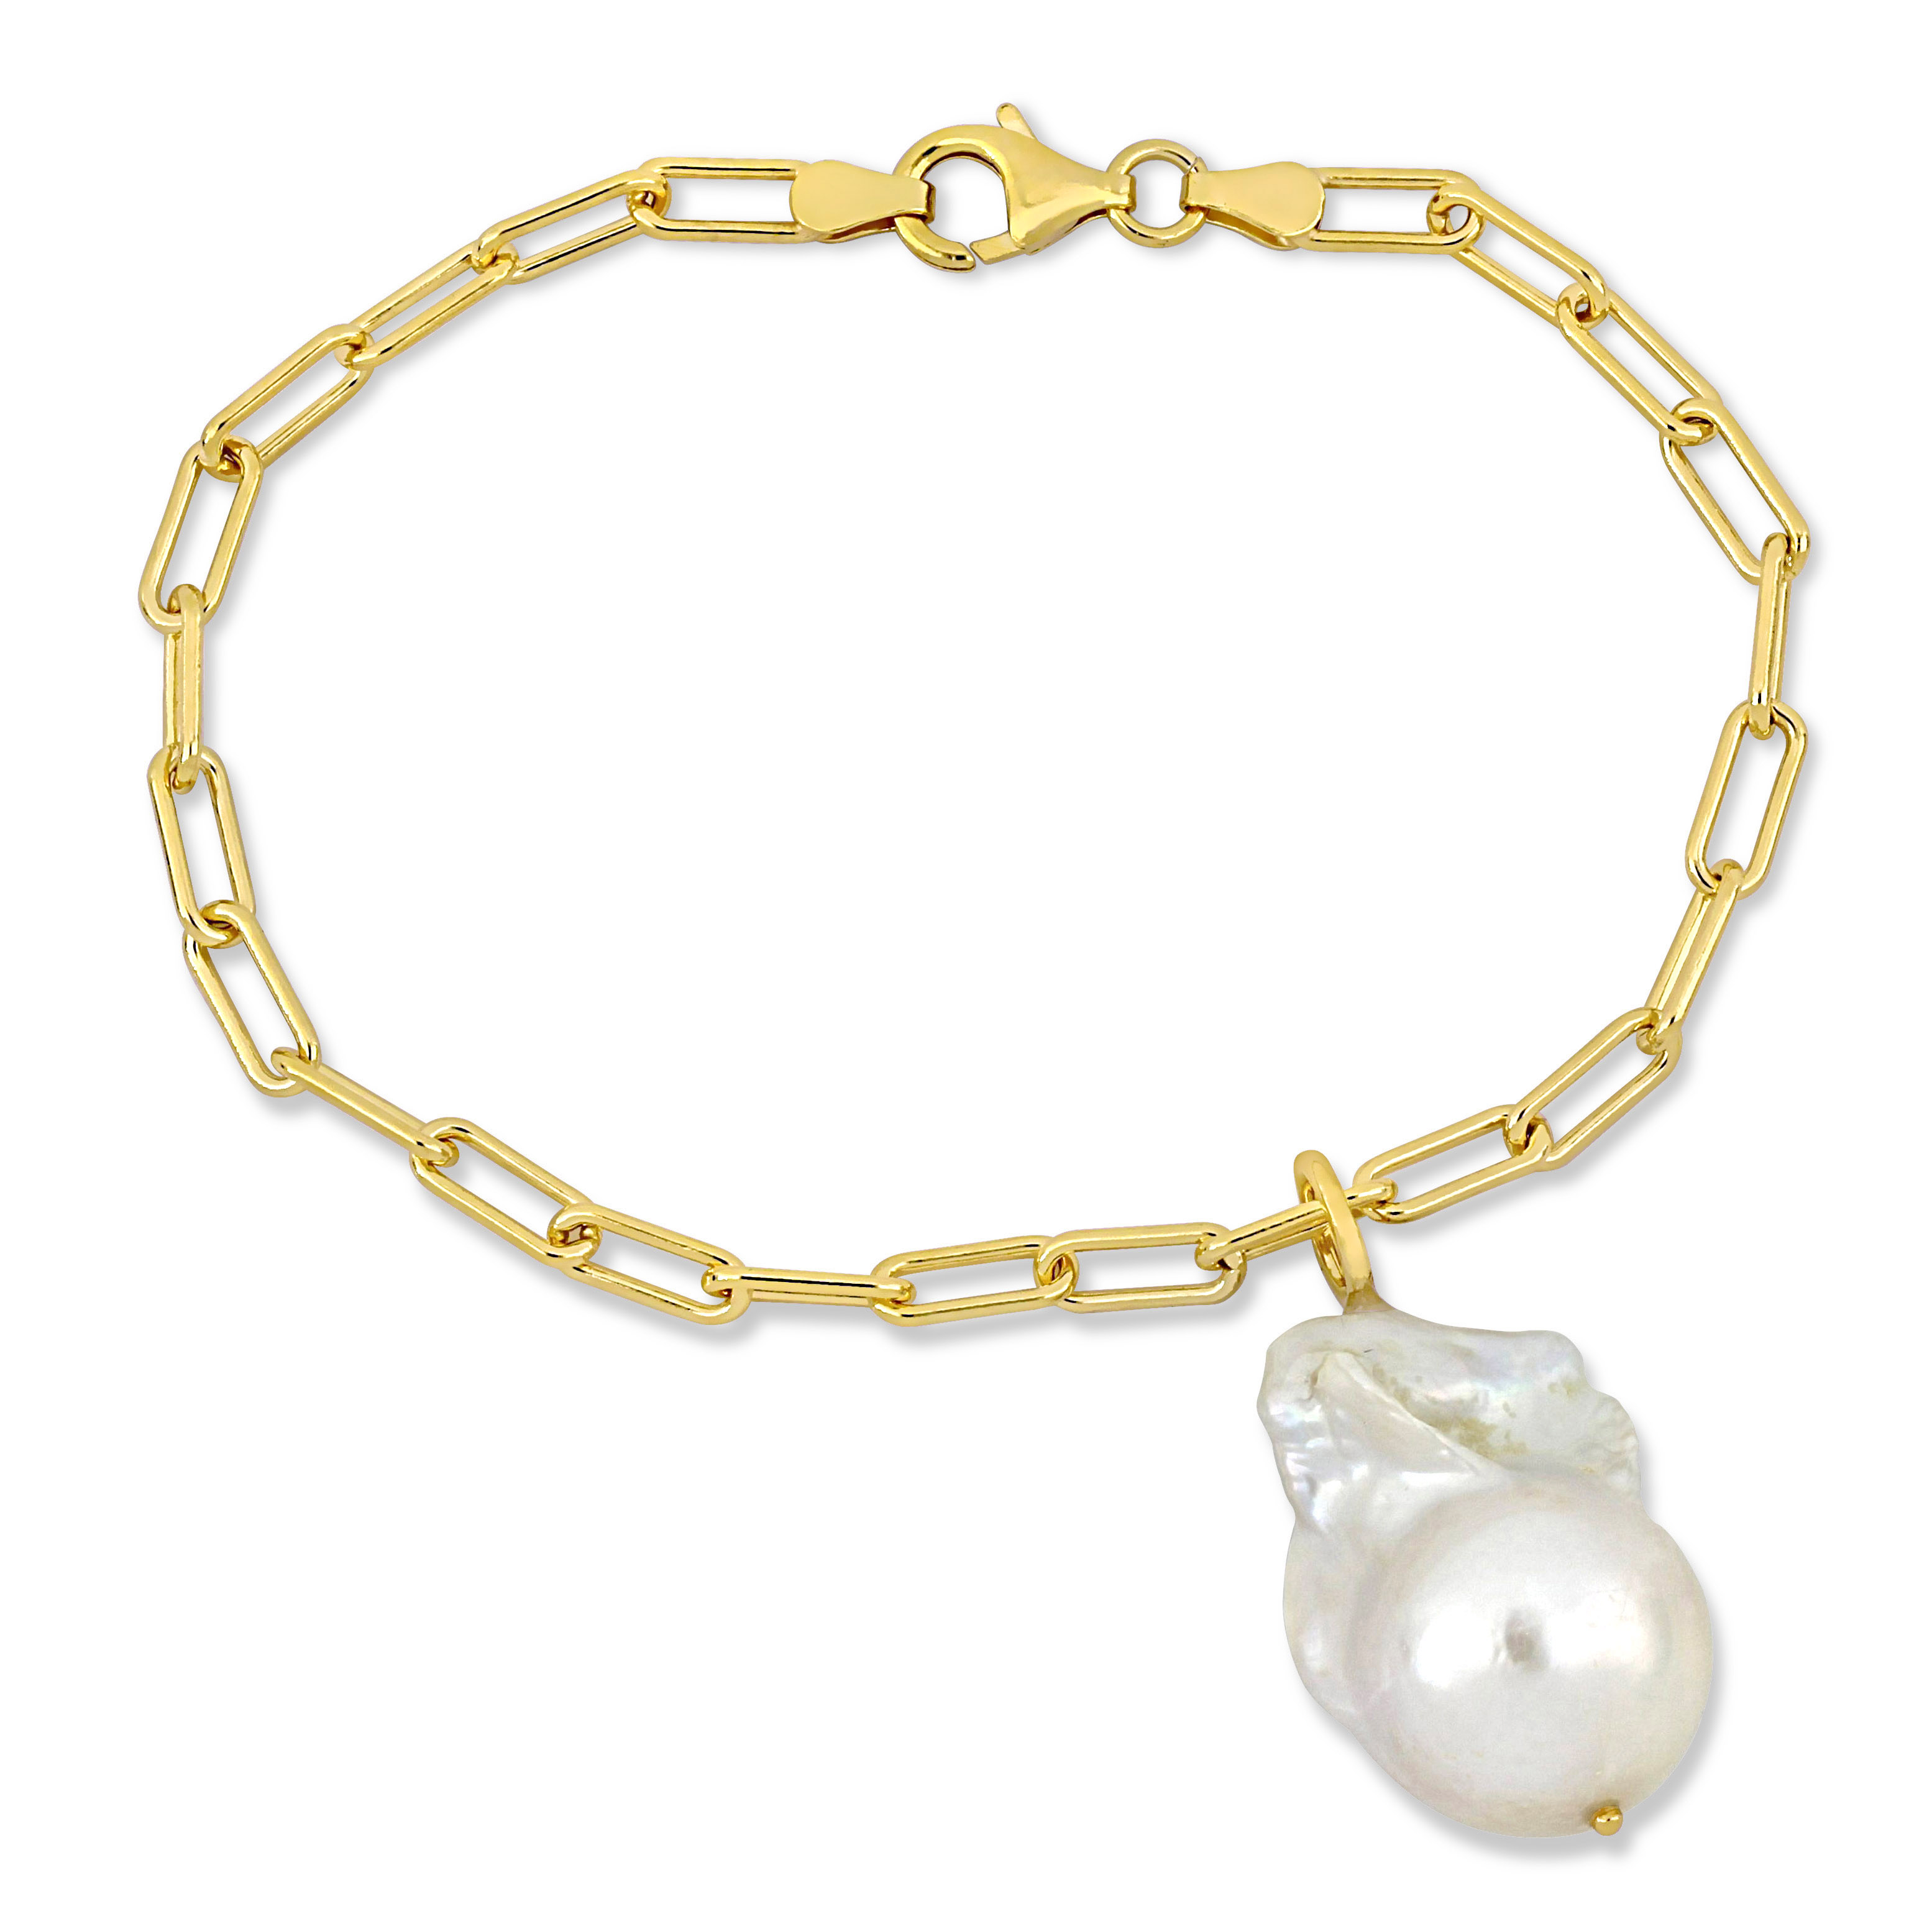 13-14mm Freshwater Cultured Pearl 3.5mm Paperclip Link Bracelet in 18K Yellow Gold Plated Sterling Silver